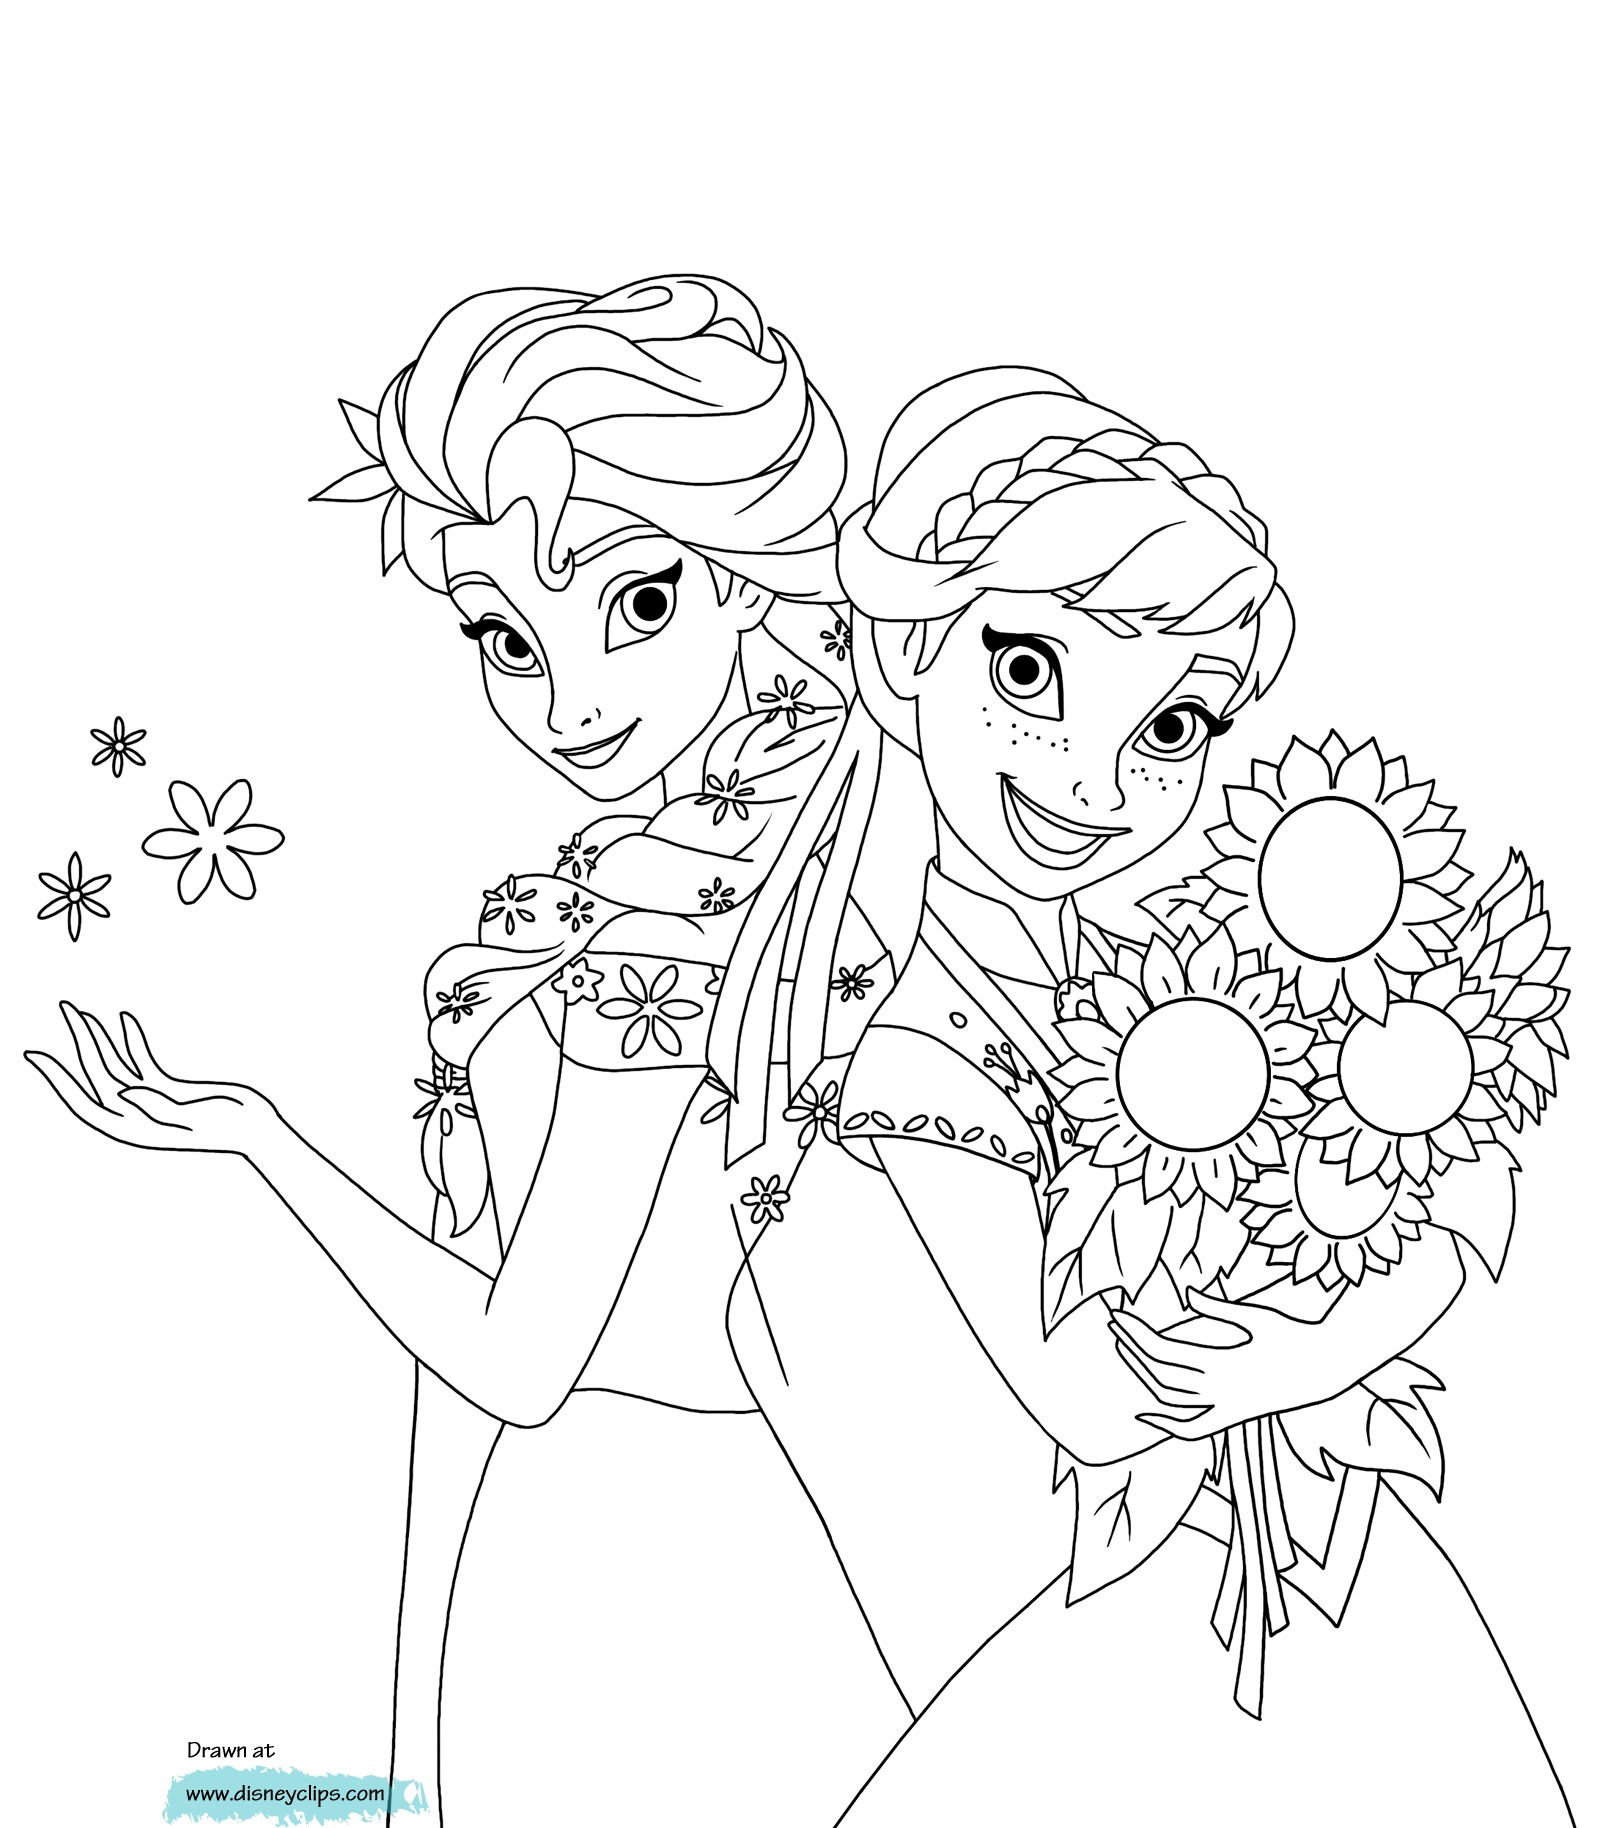 frozen-coloring-pages-pdf-at-getcolorings-free-printable-colorings-pages-to-print-and-color